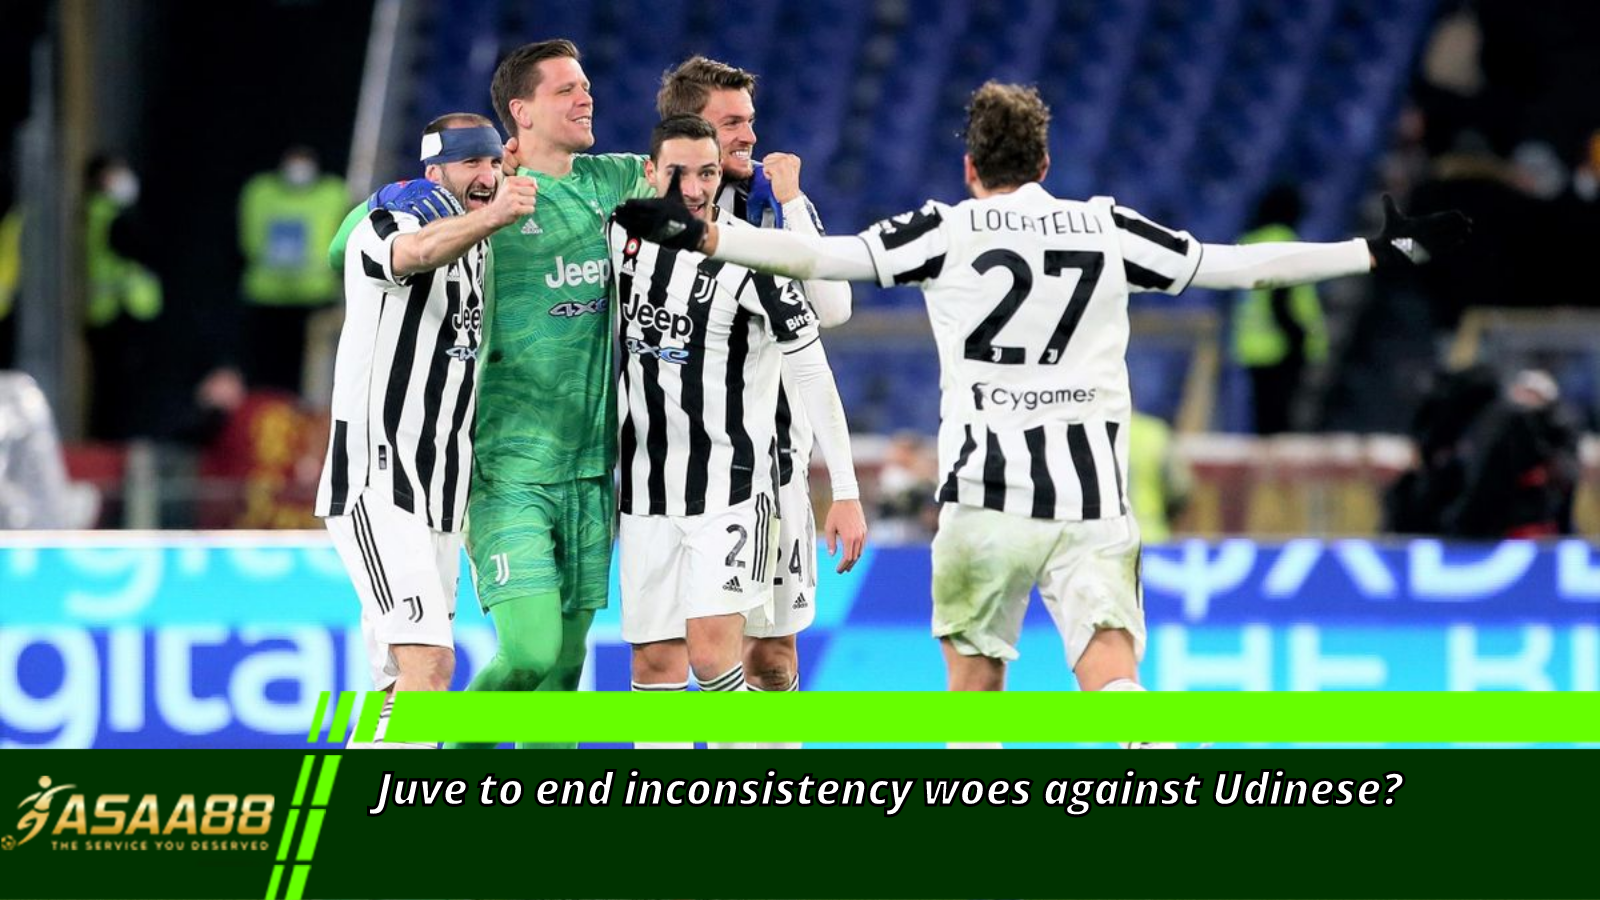 Juve to end inconsistency woes against Udinese?